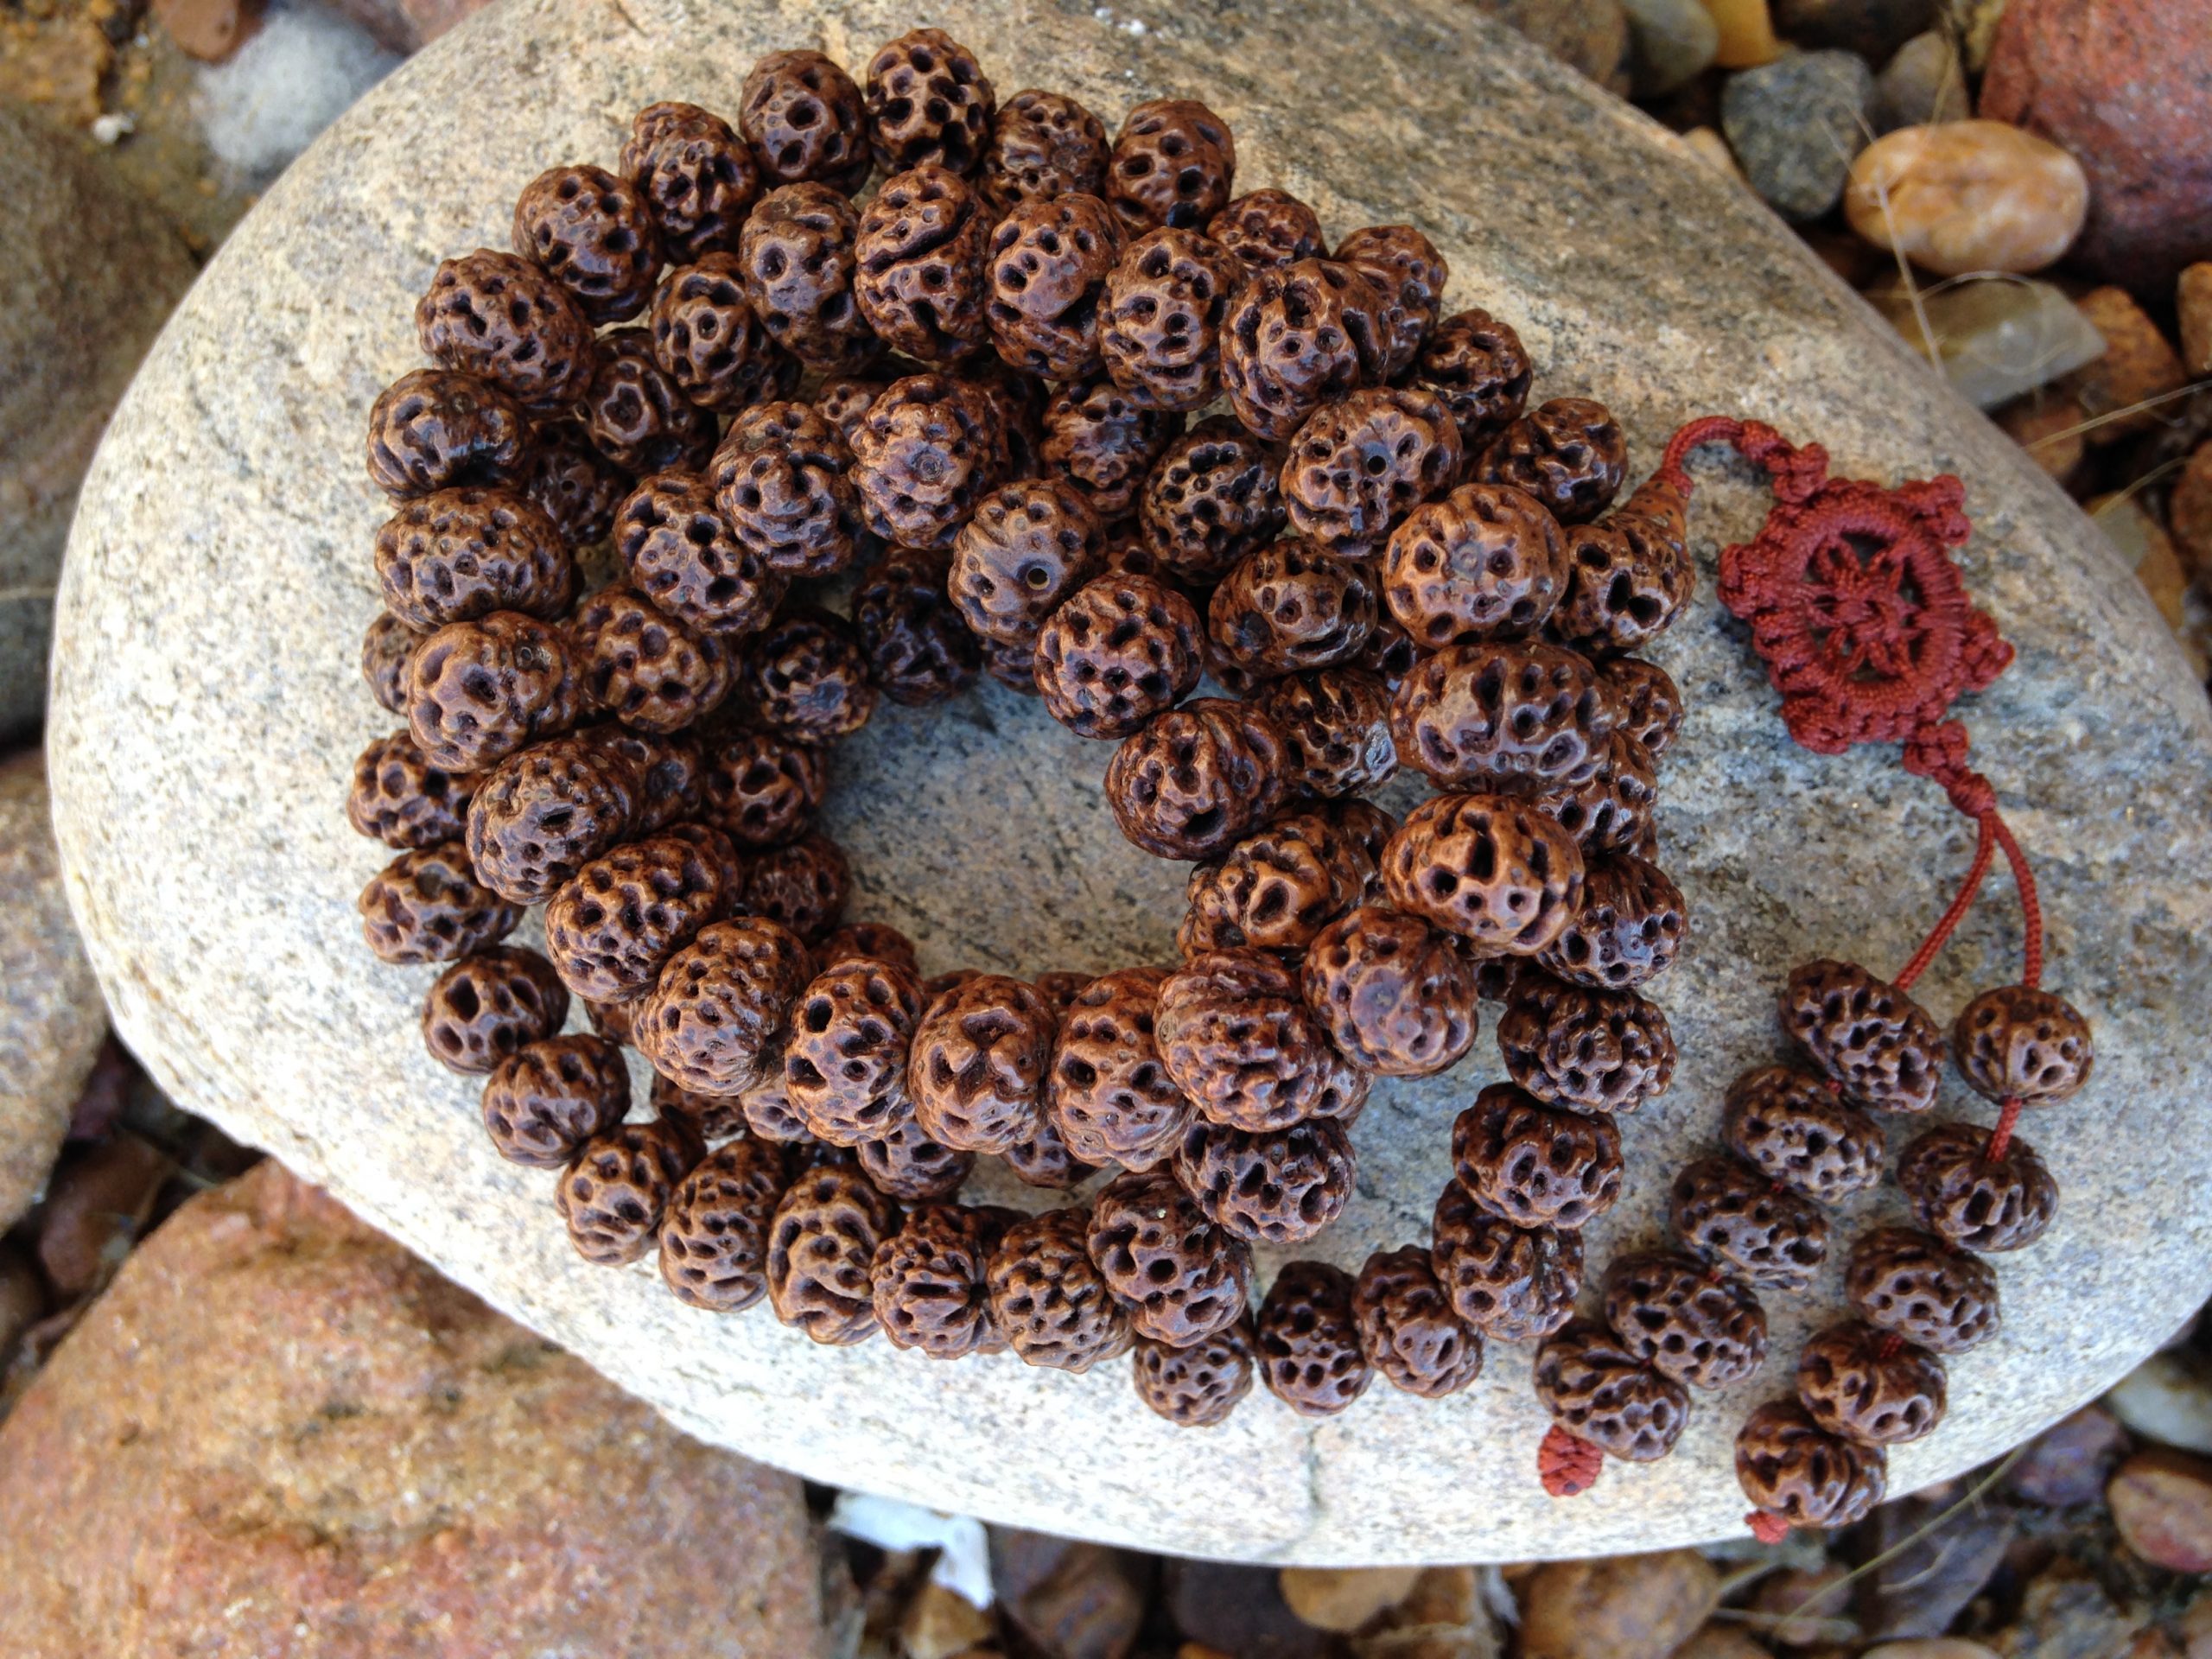 Unpolished Bodhi Seed Mala with red cord